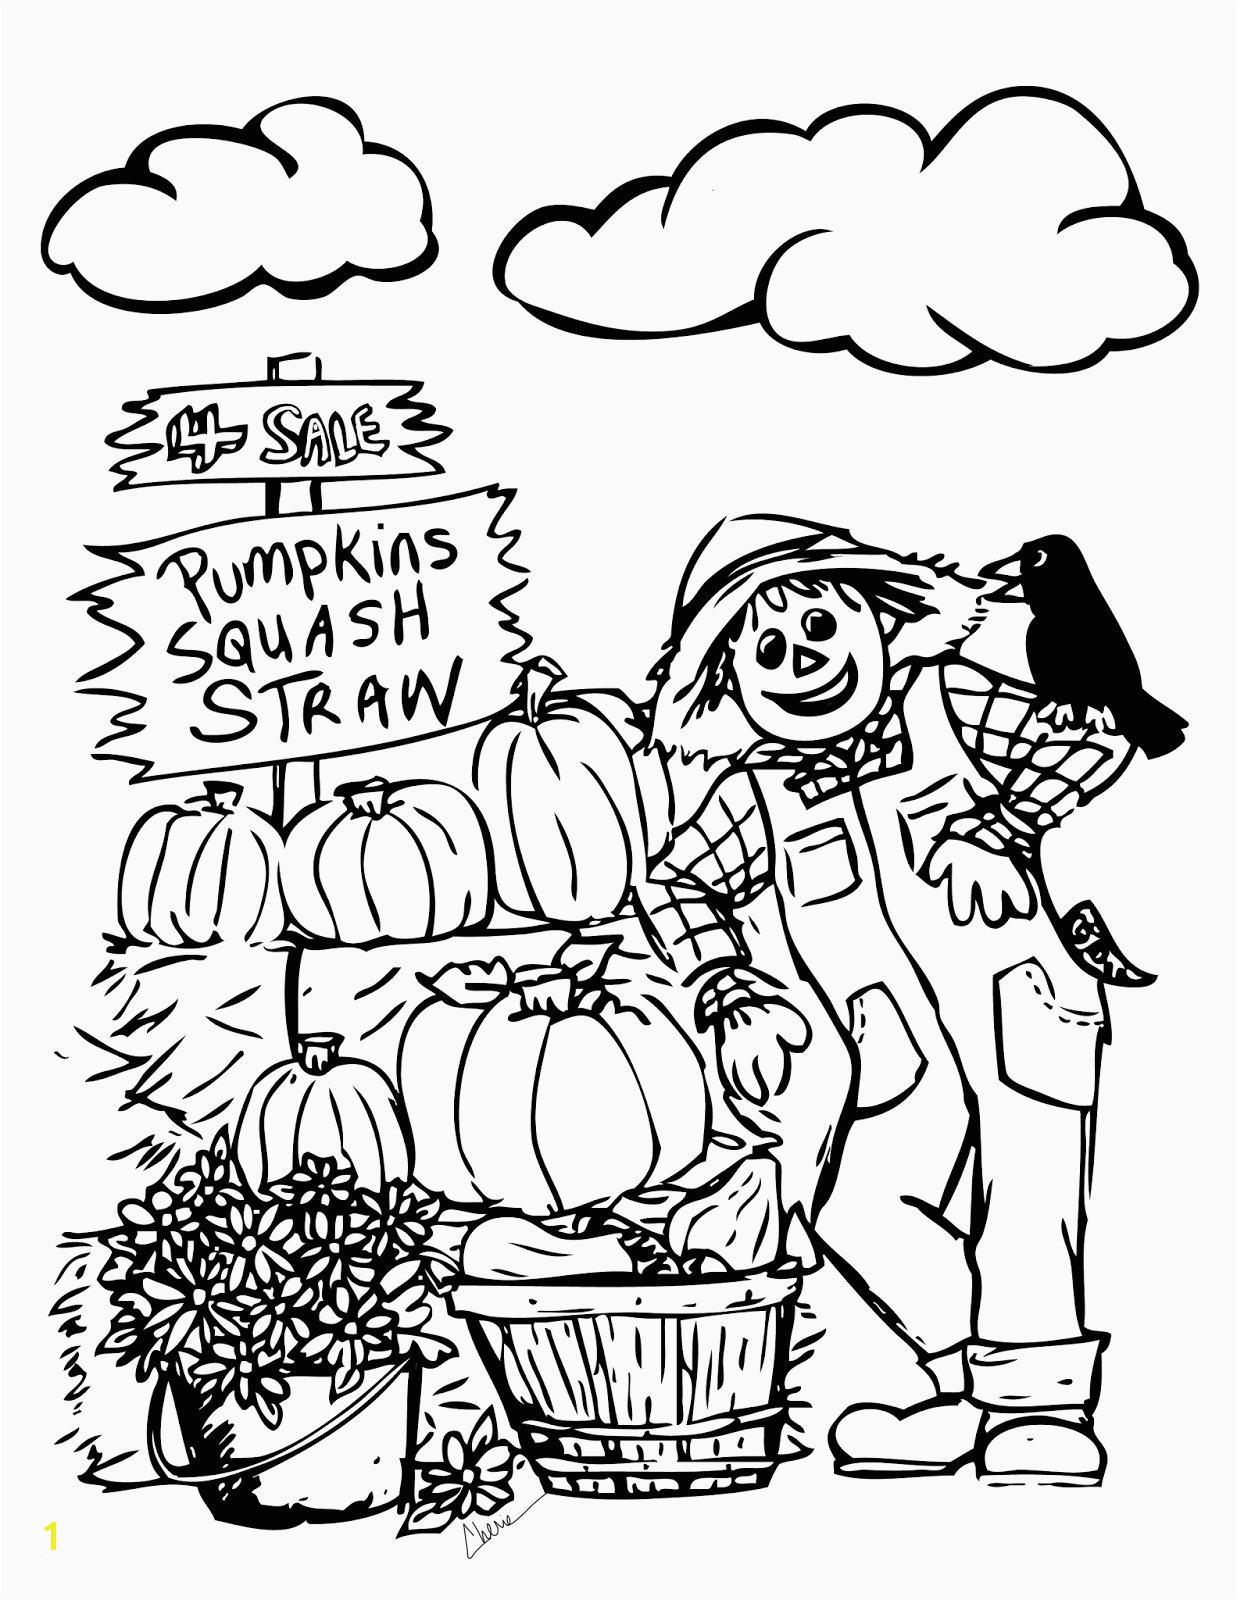 Automn Coloring Pages Lovely Fall Coloring Pages for Adults Printable